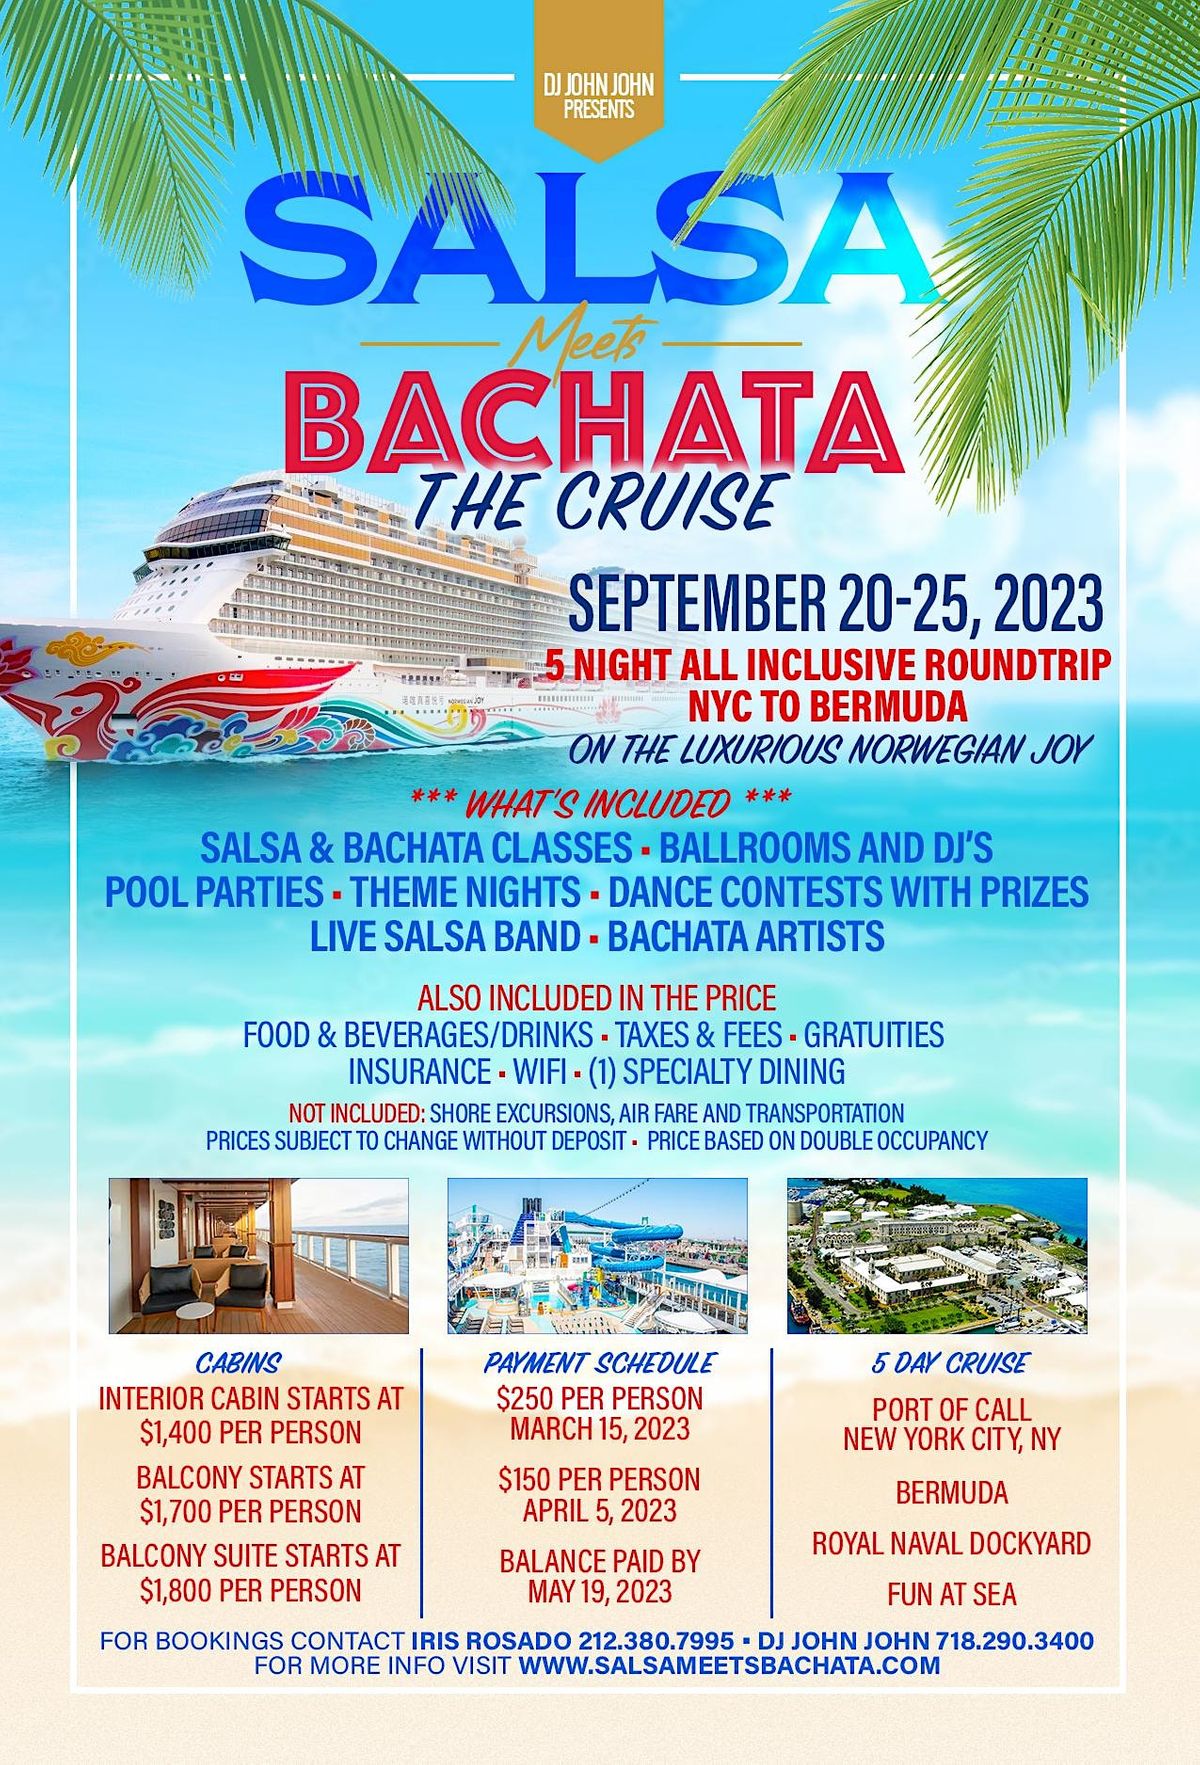 SALSA MEETS BACHATA "THE CRUISE" 5 NIGHT ALL-INCLUSIVE NYC TO BERMUDA